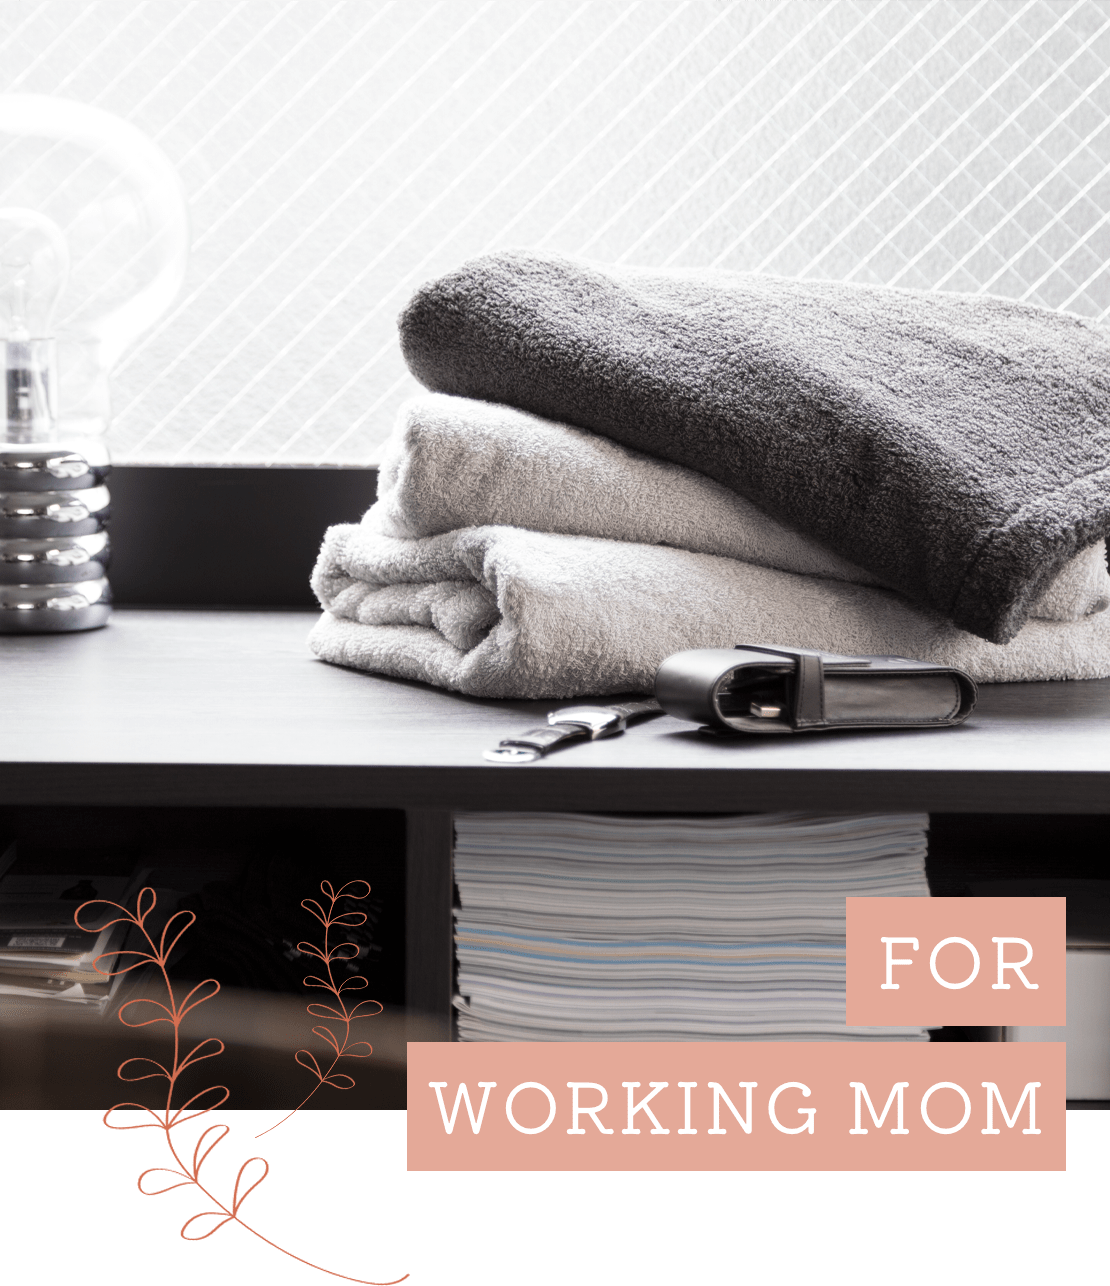 FOR WORKING MOM